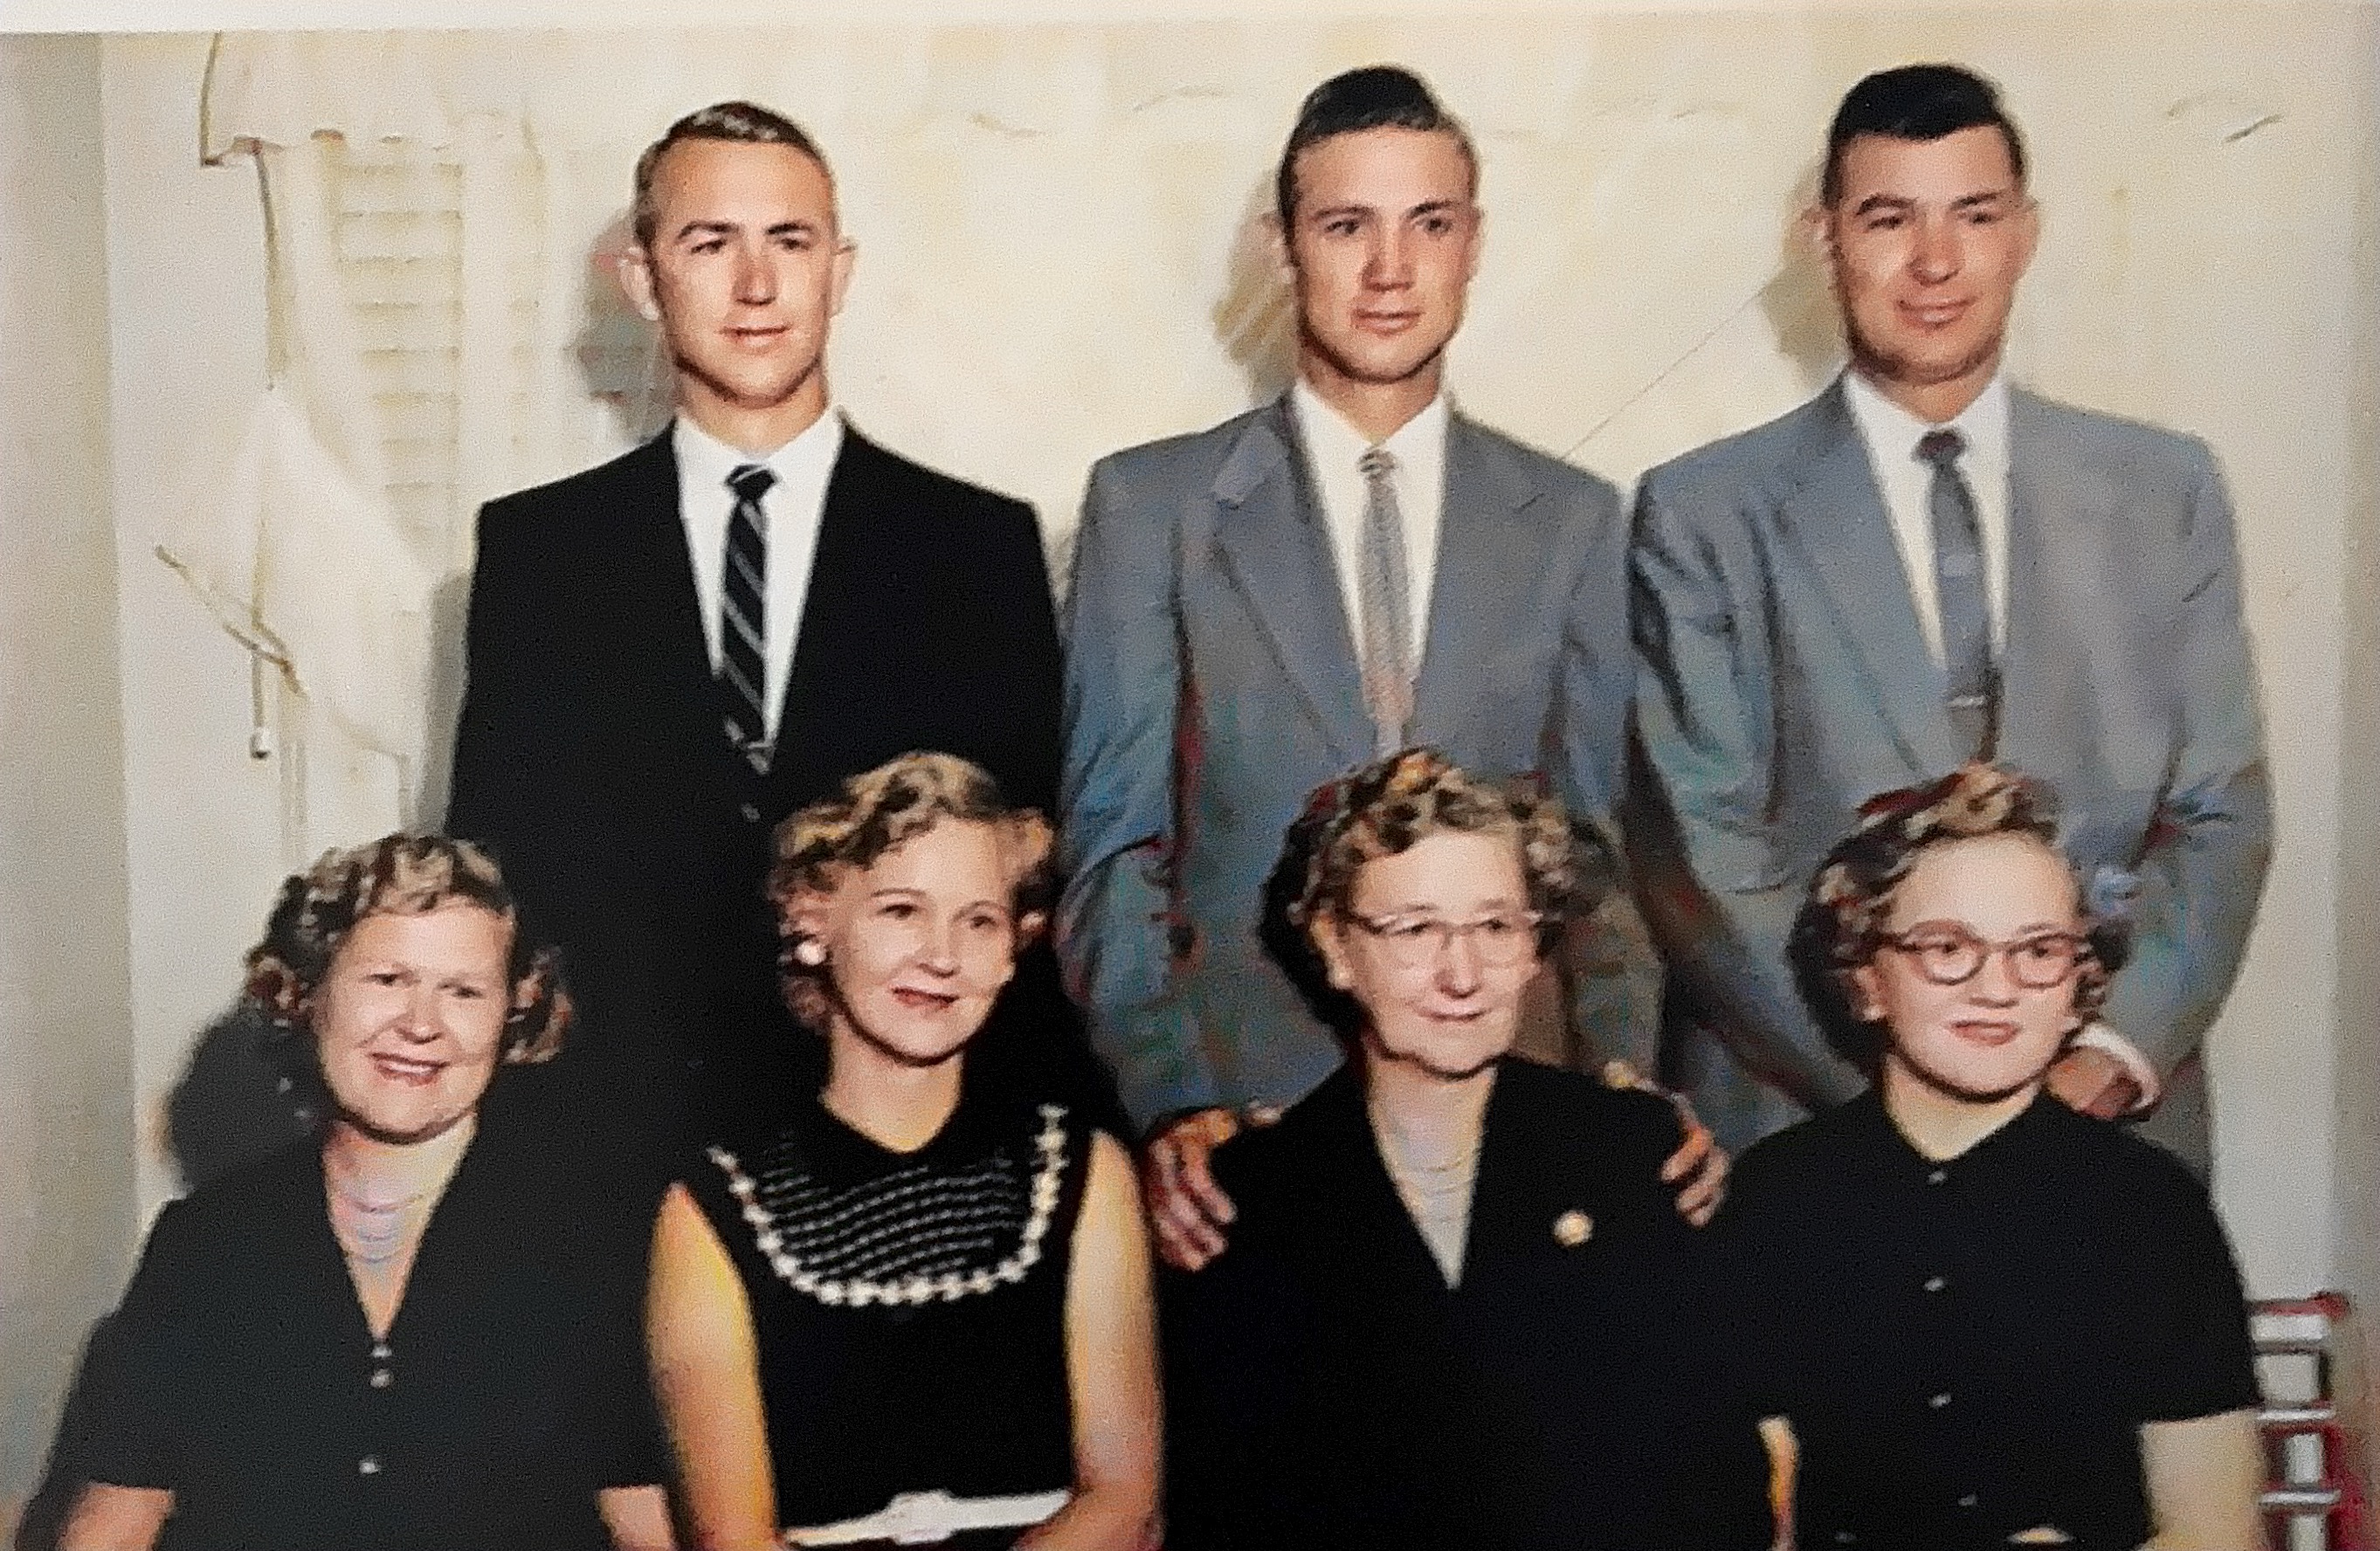 My mother with my uncles and aunts 1955